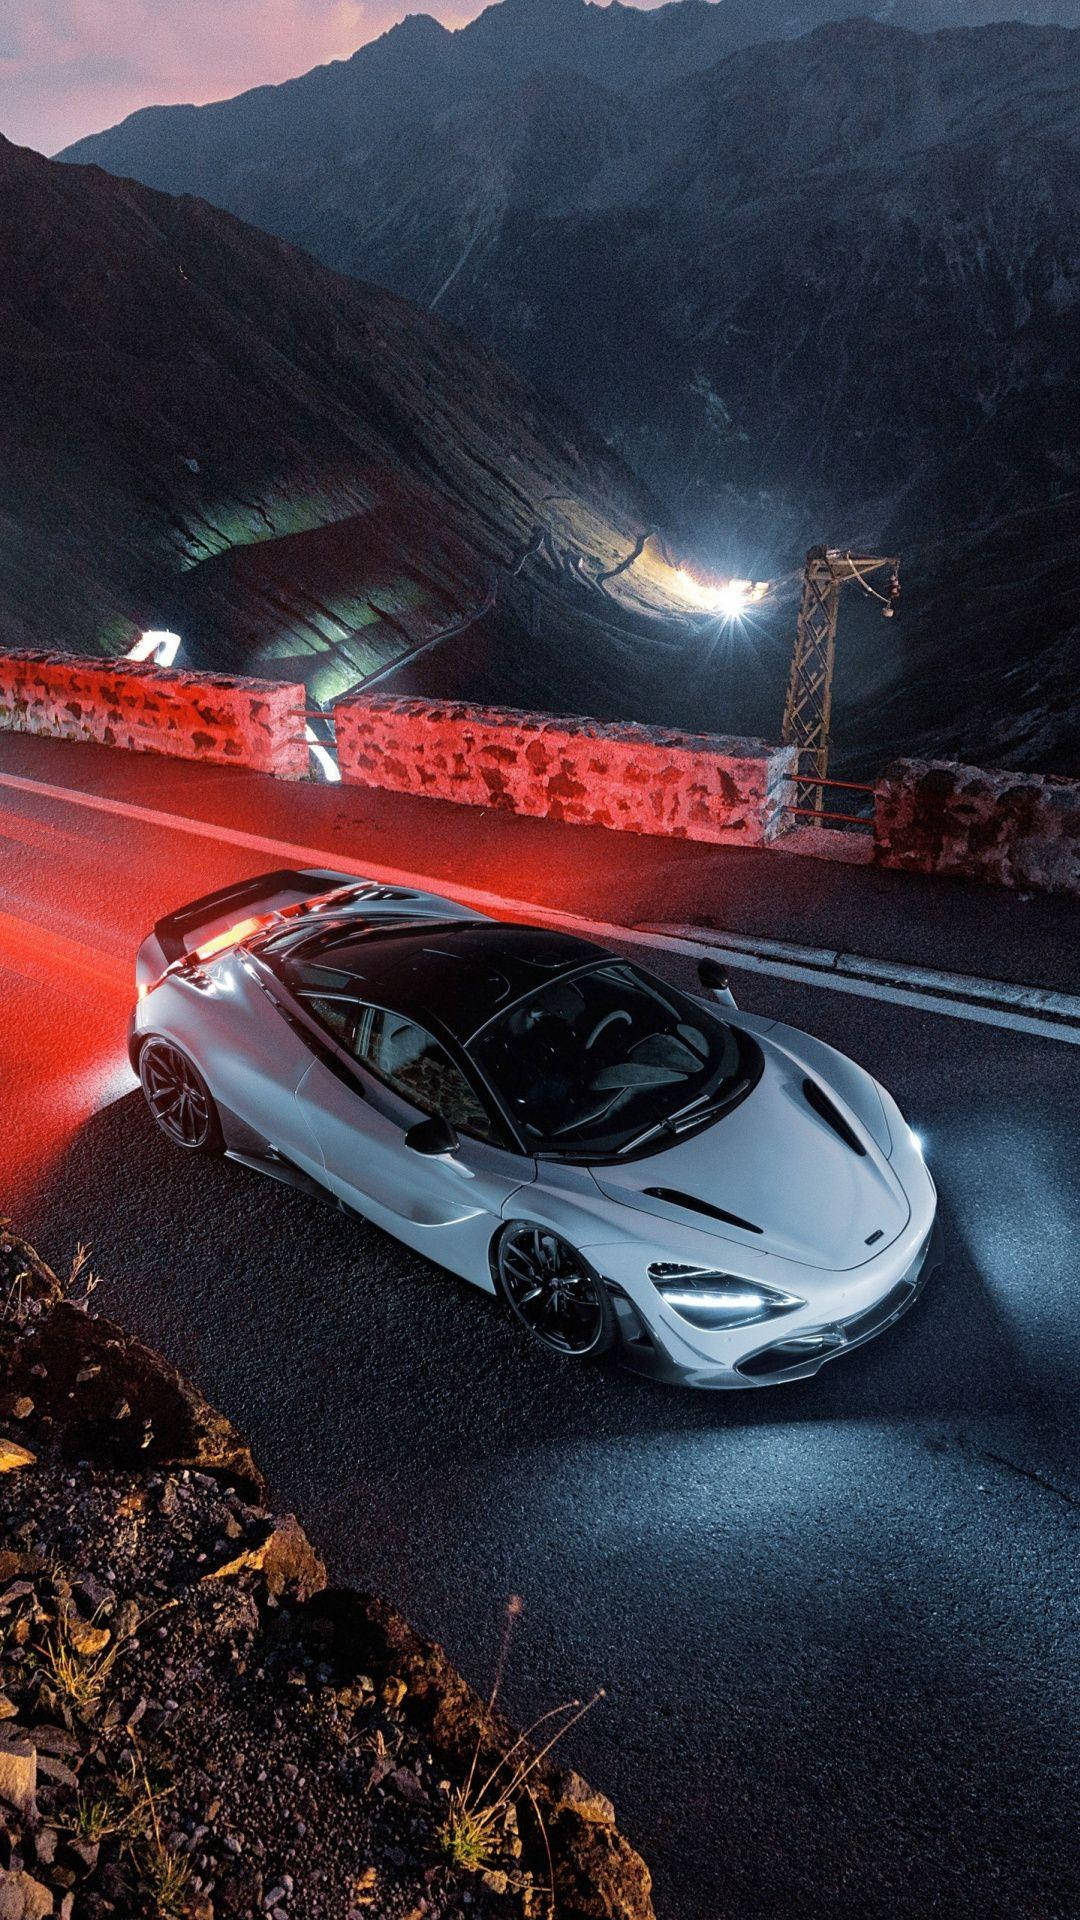 A Mclaren 720s Showcased In All Its Magnificence Under Aesthetic Lighting